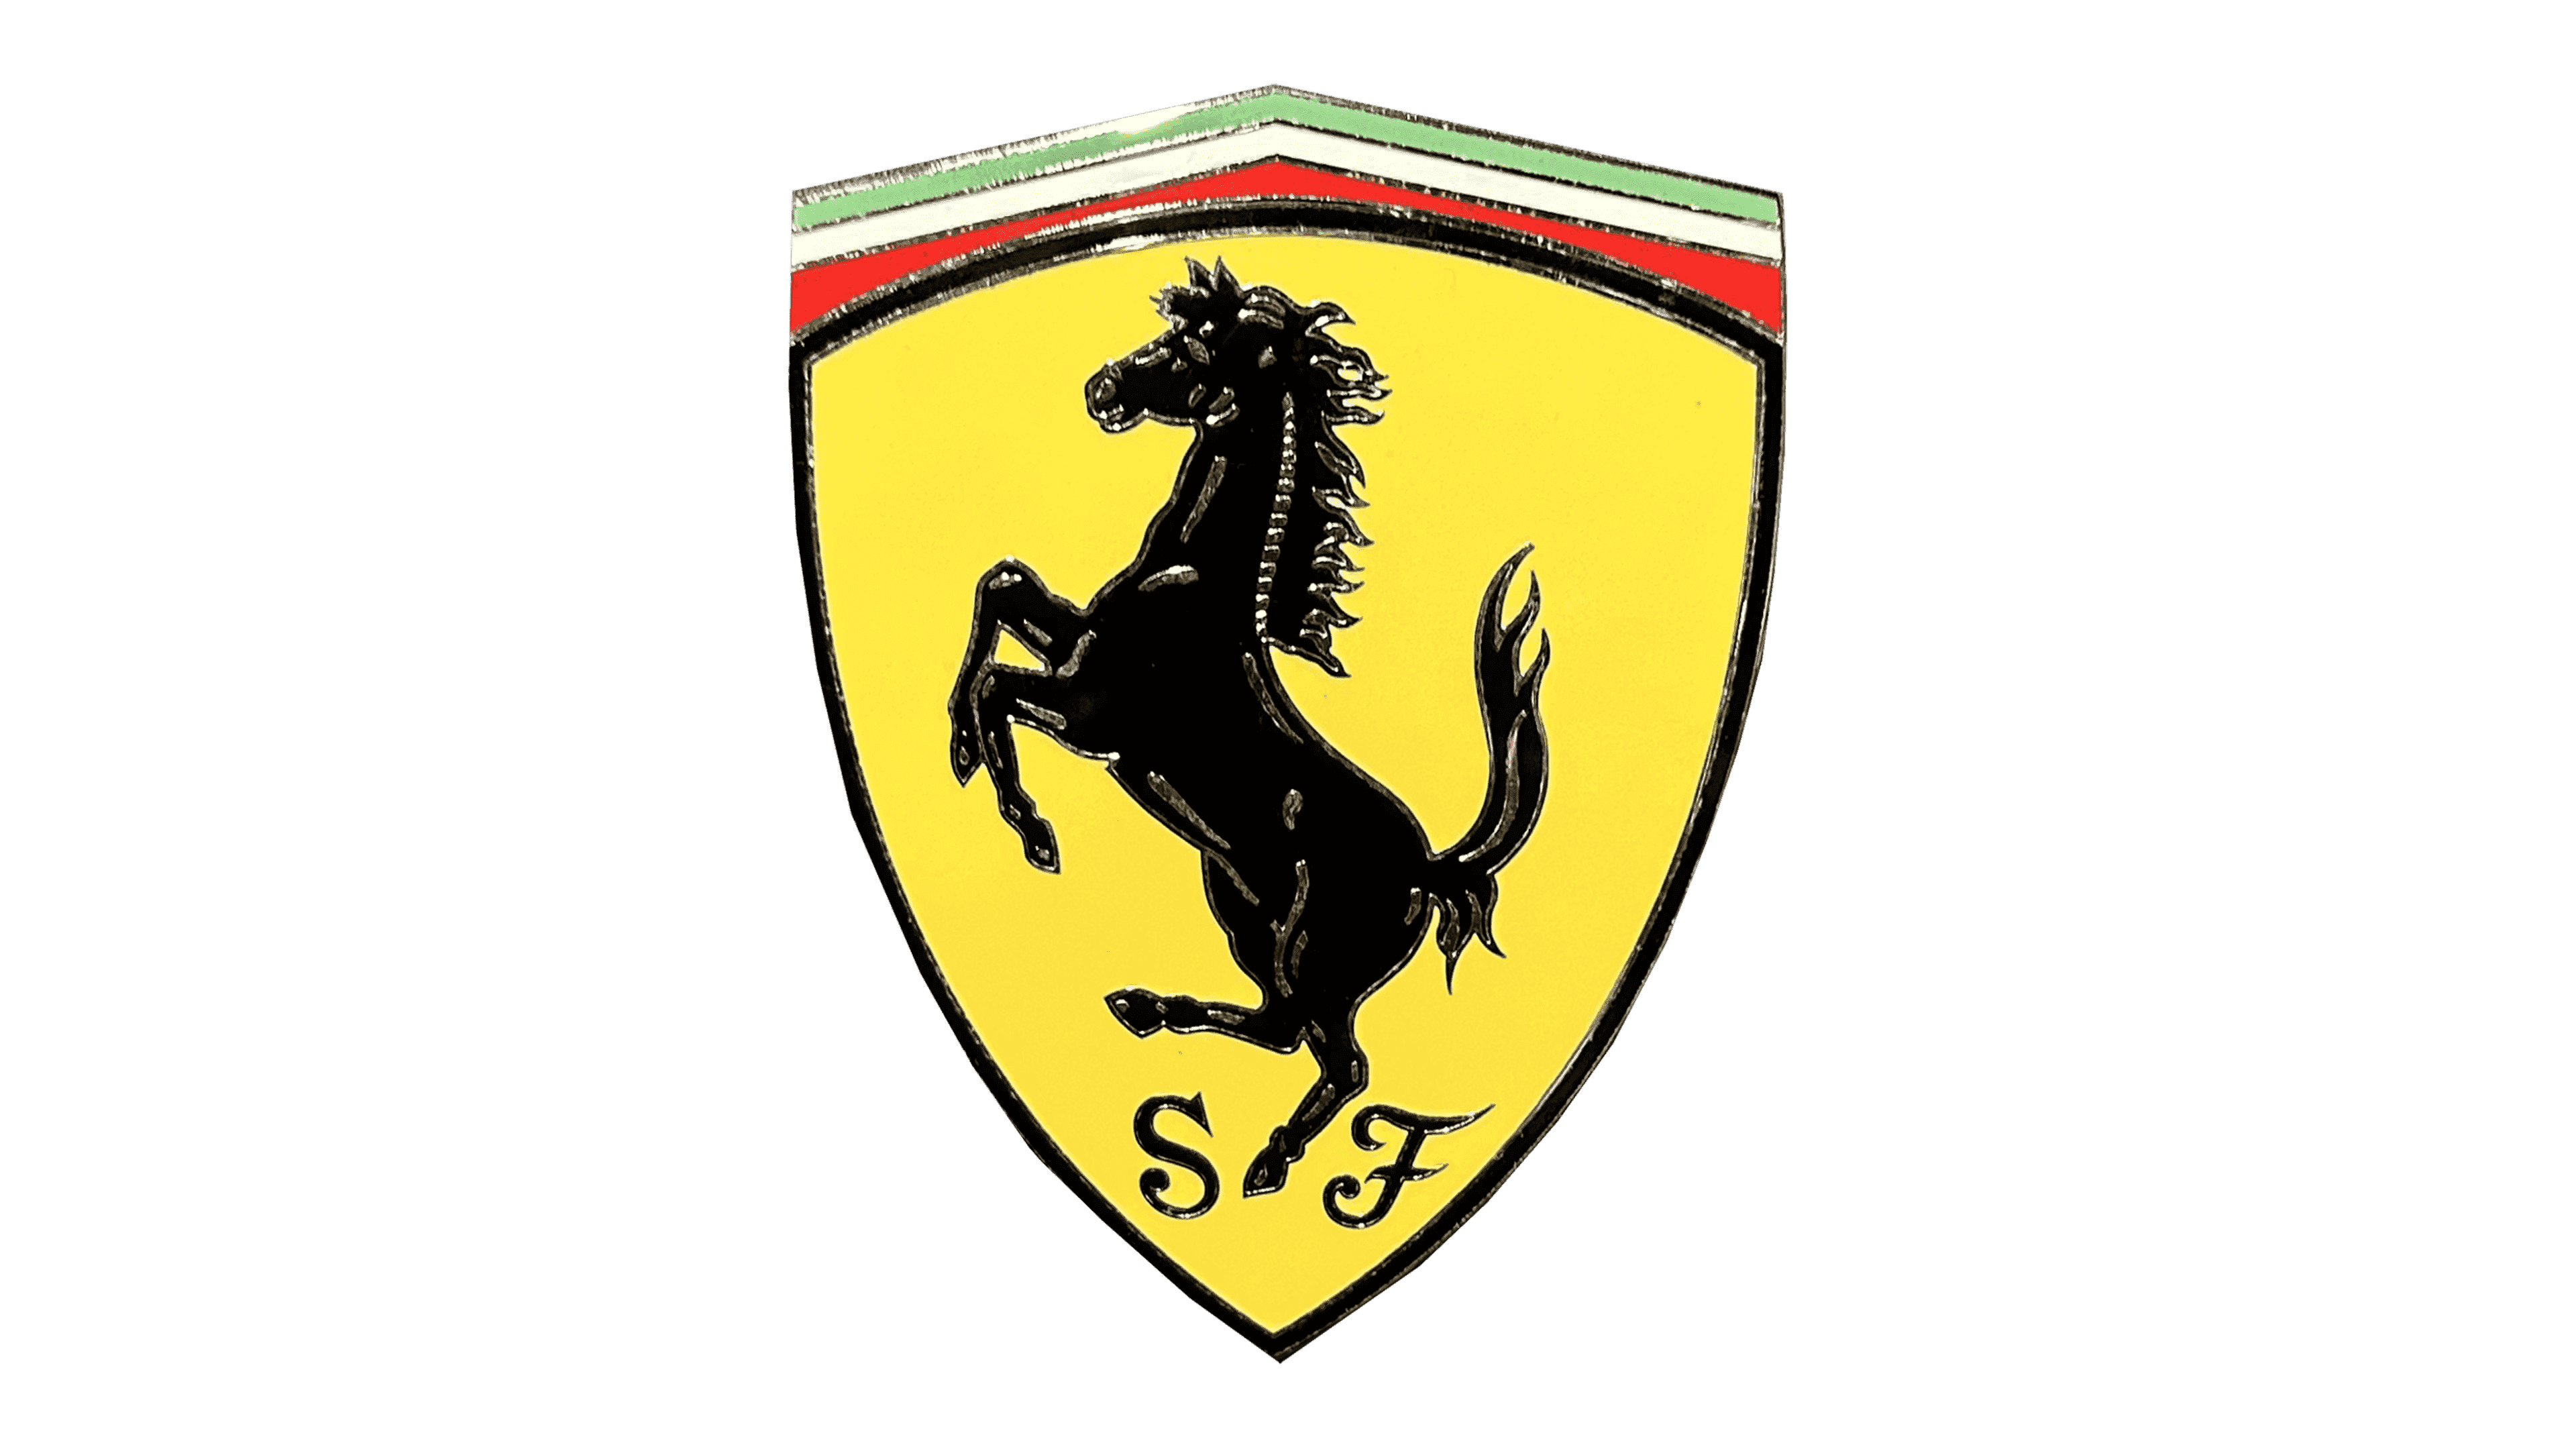 Ferrari Logo and sign, new logo meaning and history, PNG, SVG